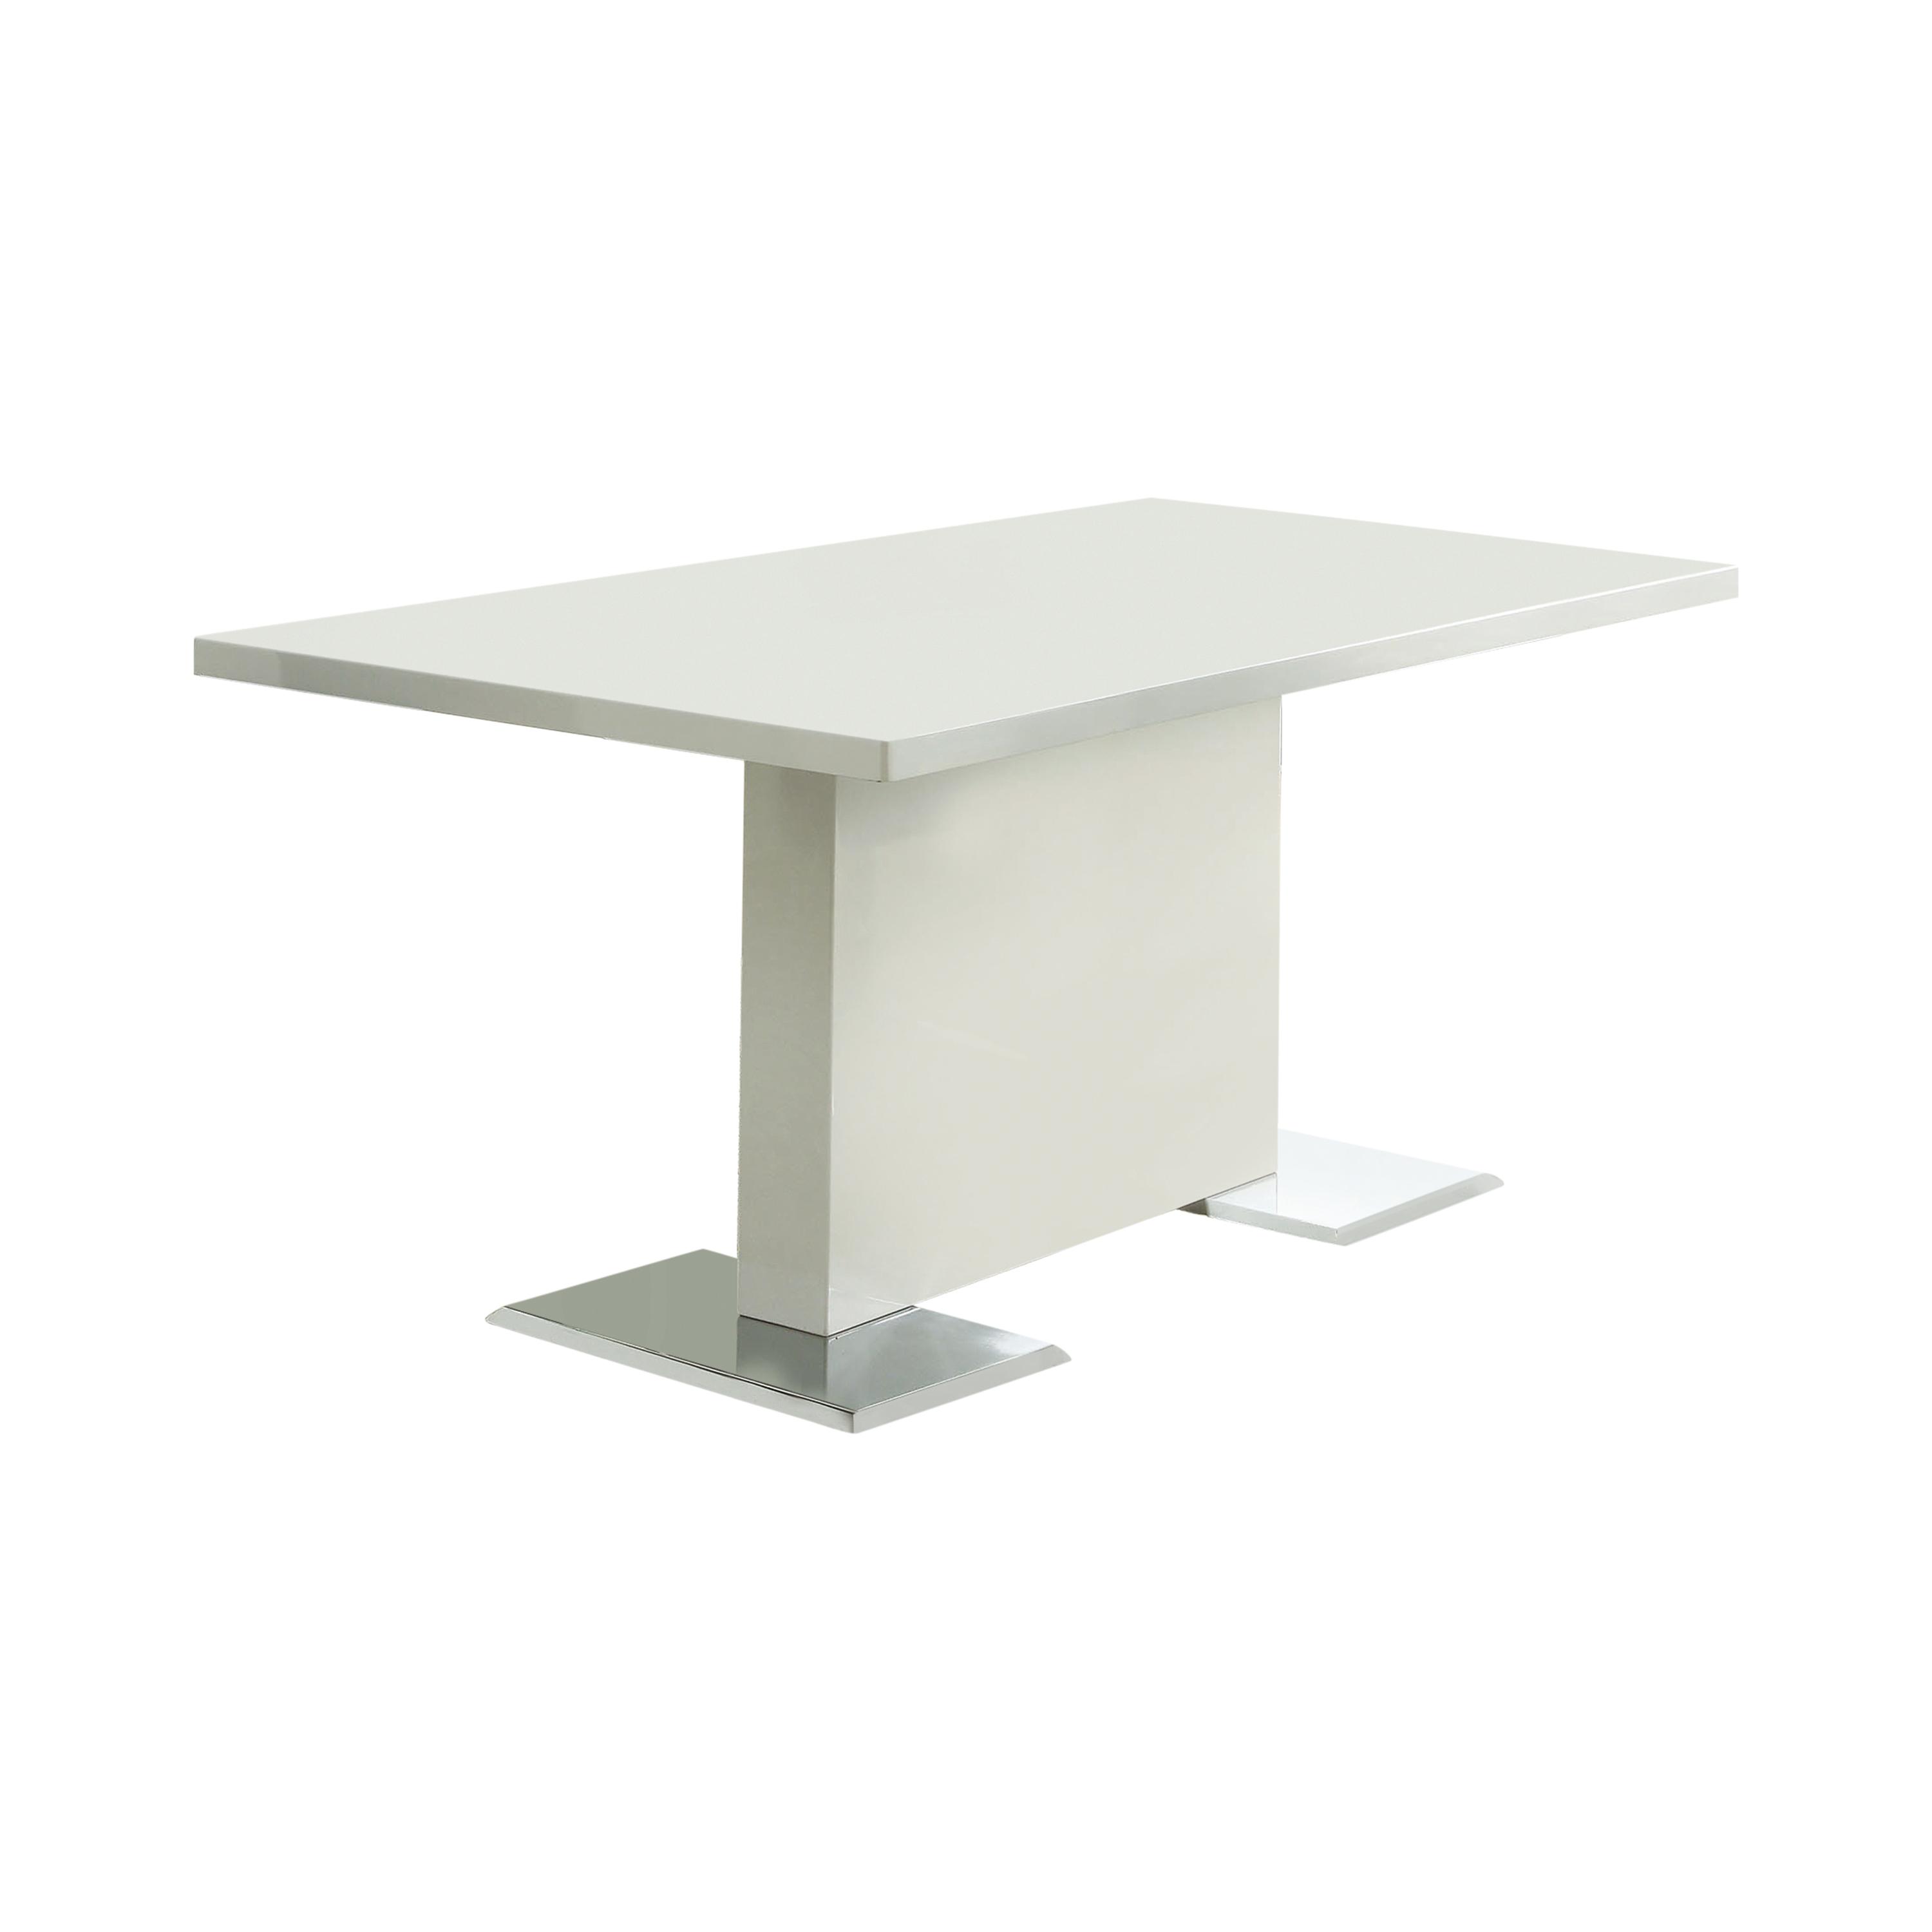 Contemporary Dining Table 102310 Anges 102310 in White 